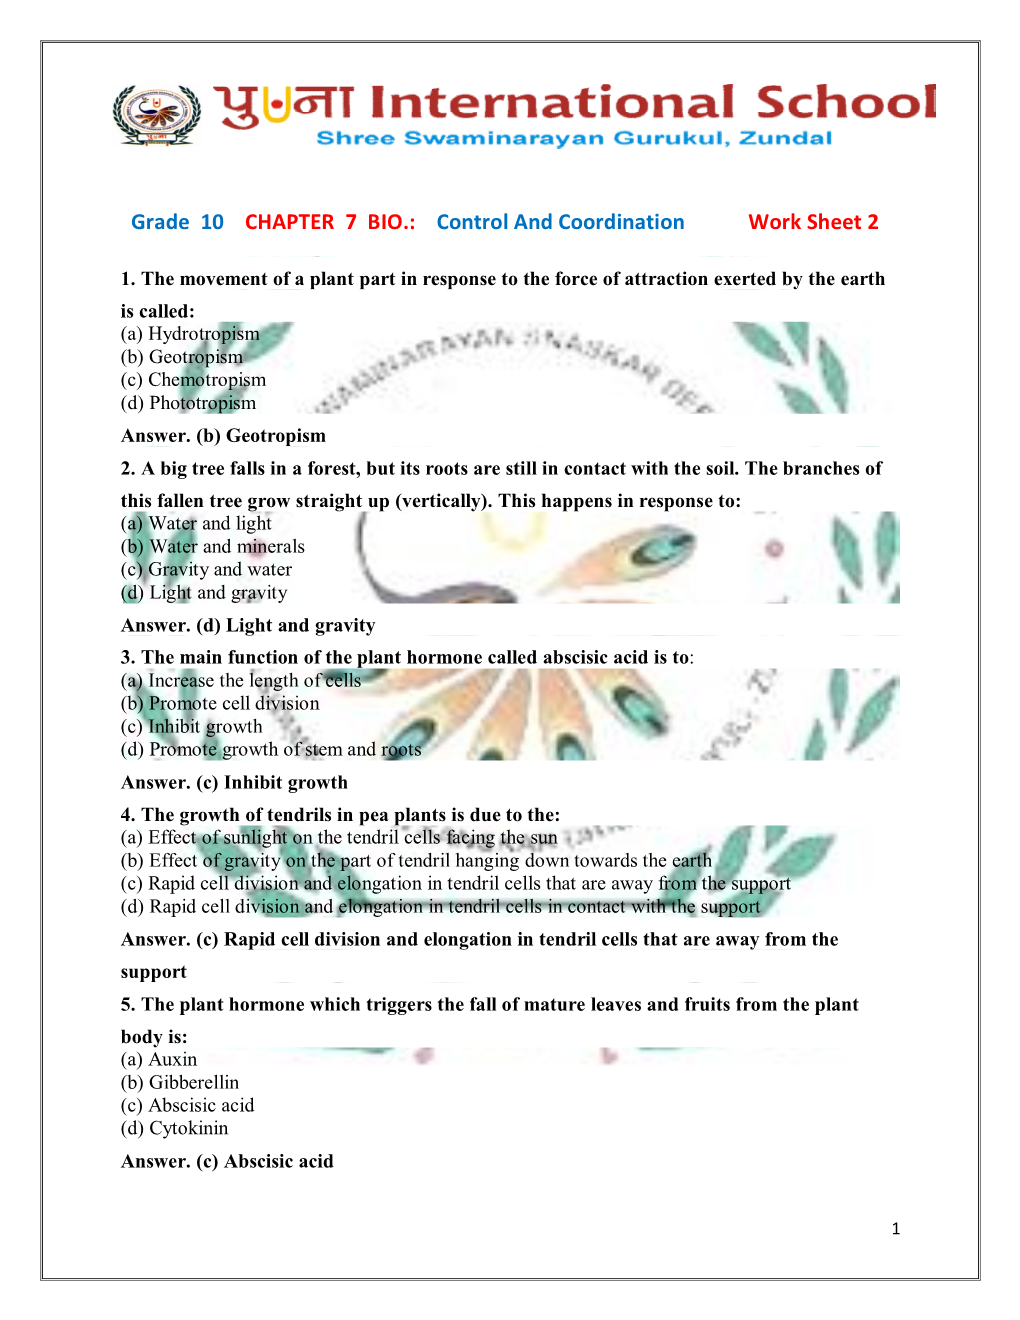 Grade 10 CHAPTER 7 BIO.: Control and Coordination Work Sheet 2